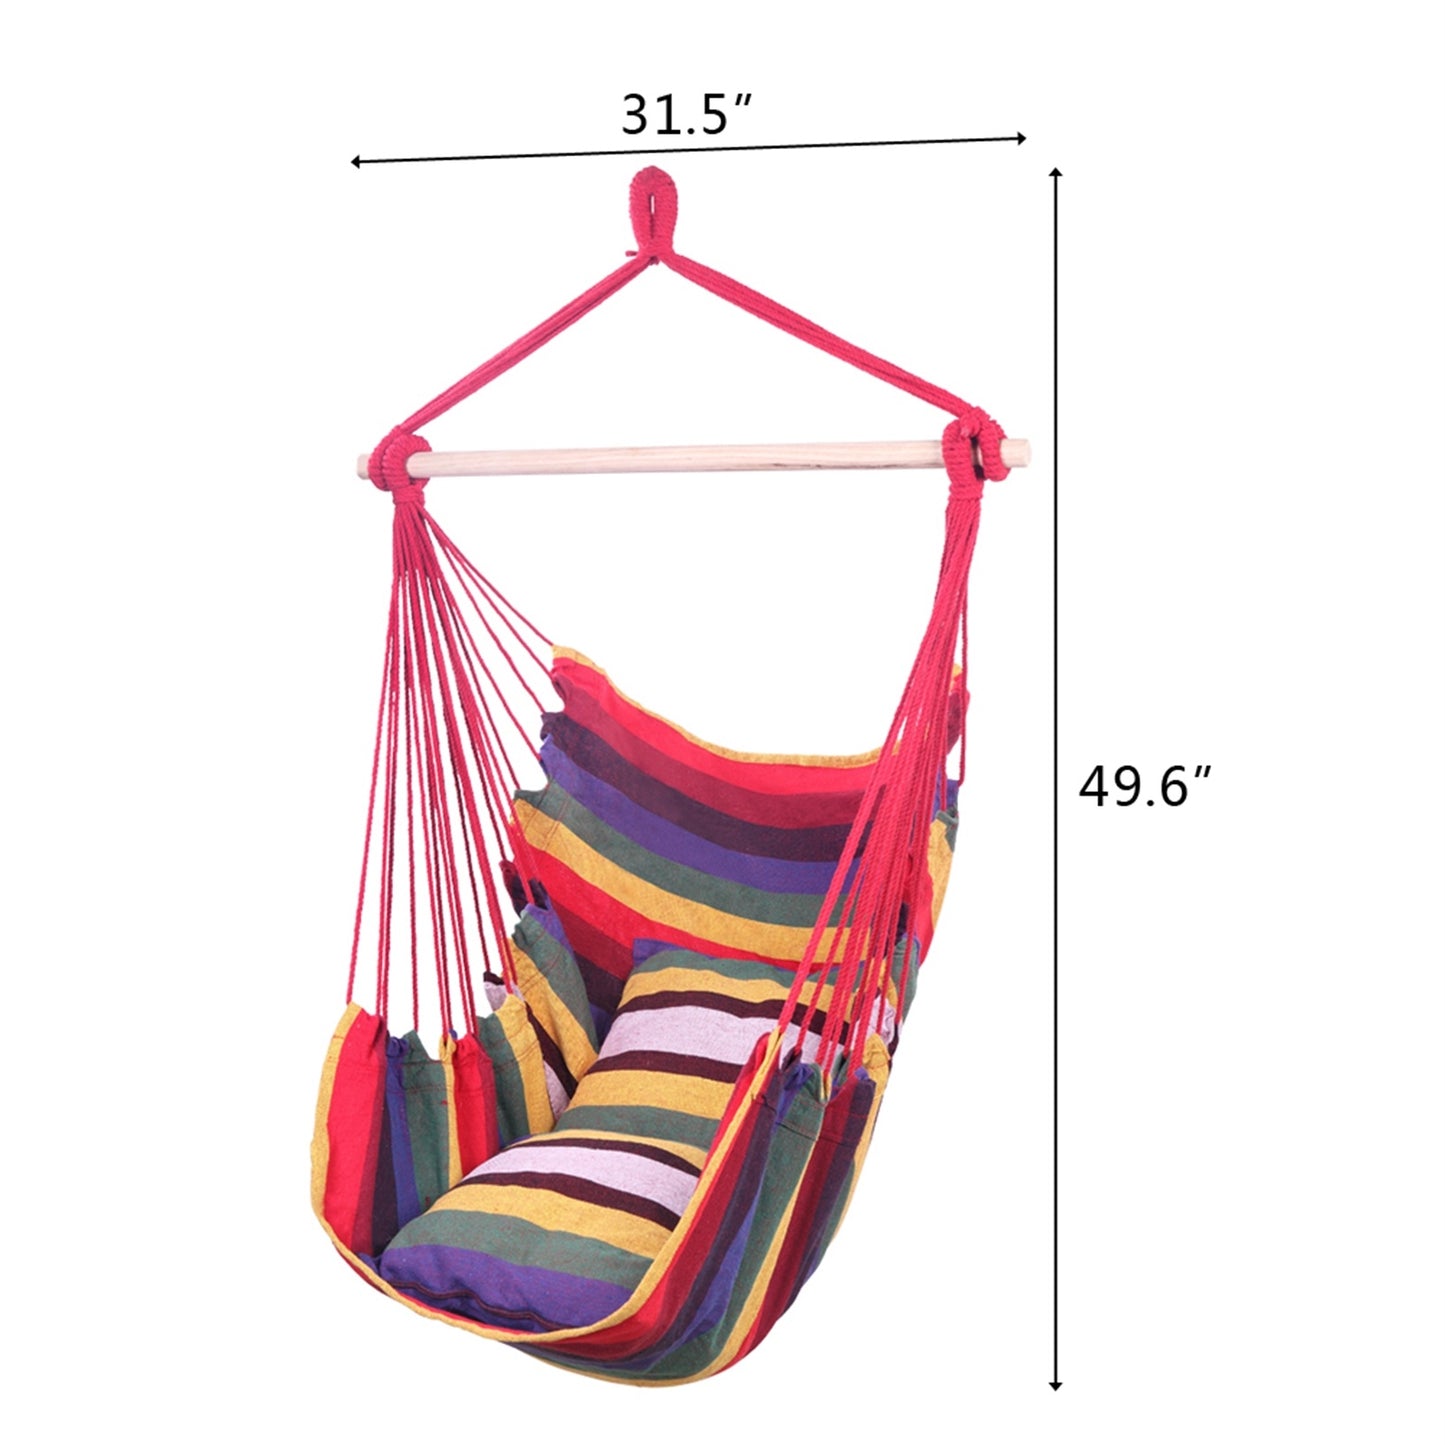 Distinctive Cotton Canvas Hanging Rope Chair with Pillows - 2 Color Combos